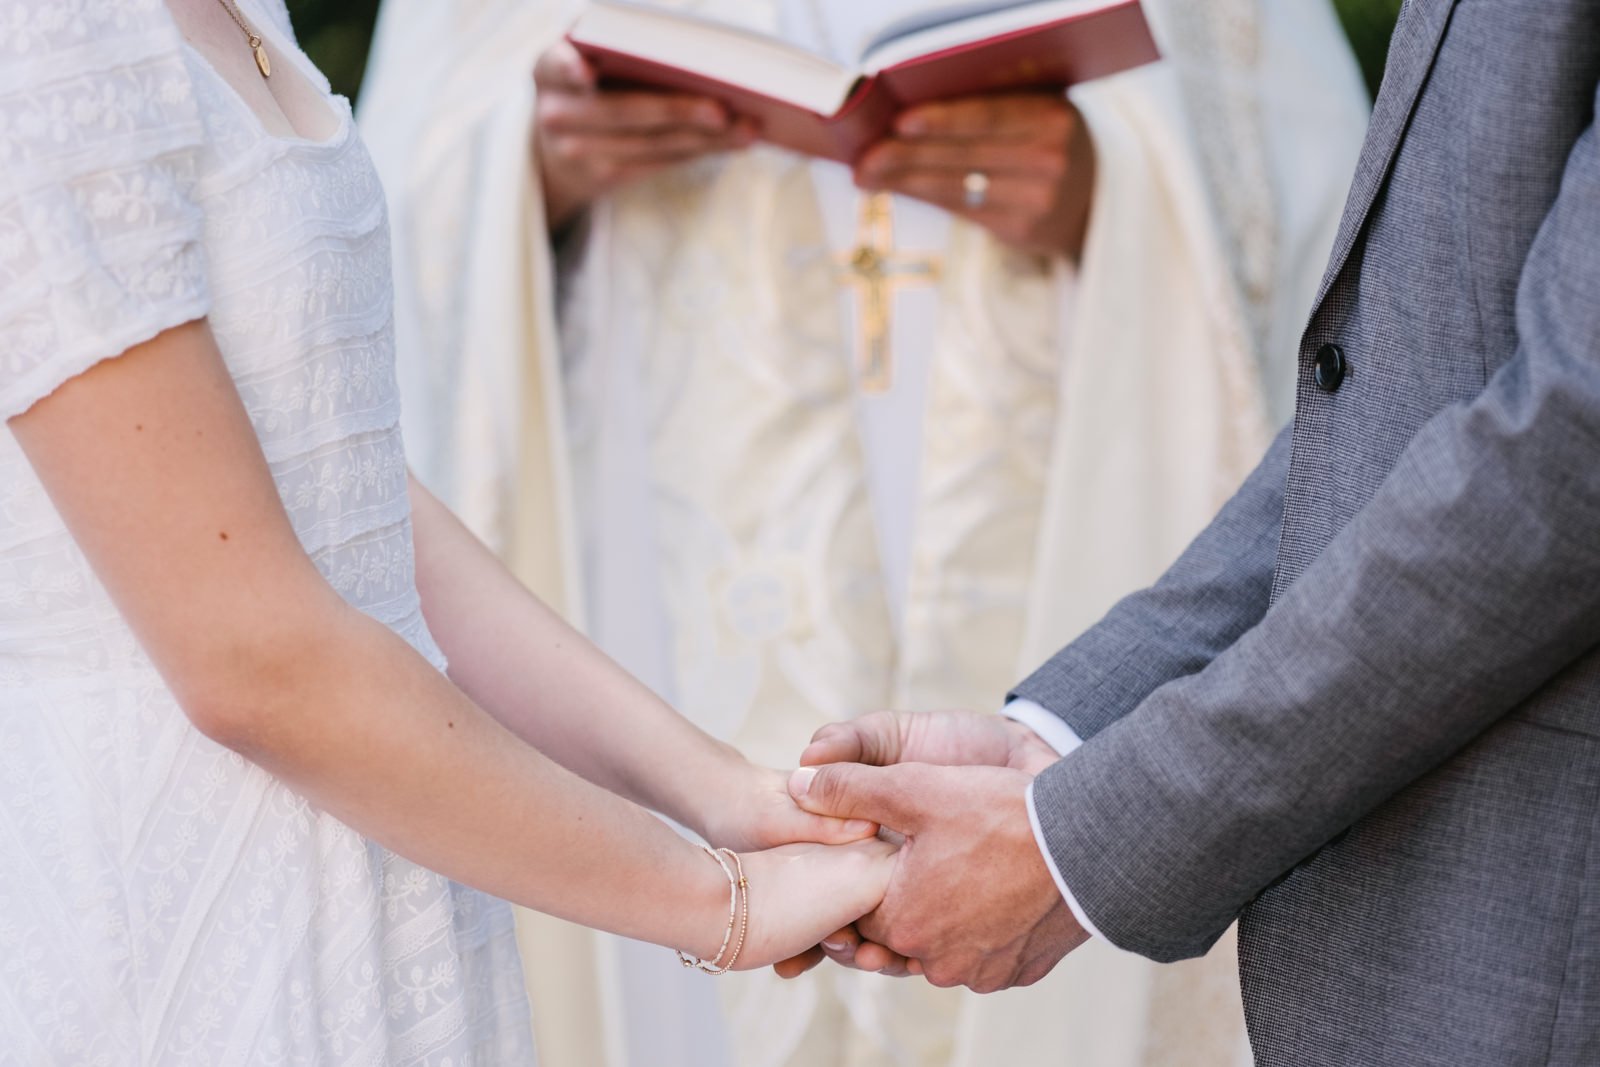  Bride and groom hold hands close up while officiant holds red bible behind them 